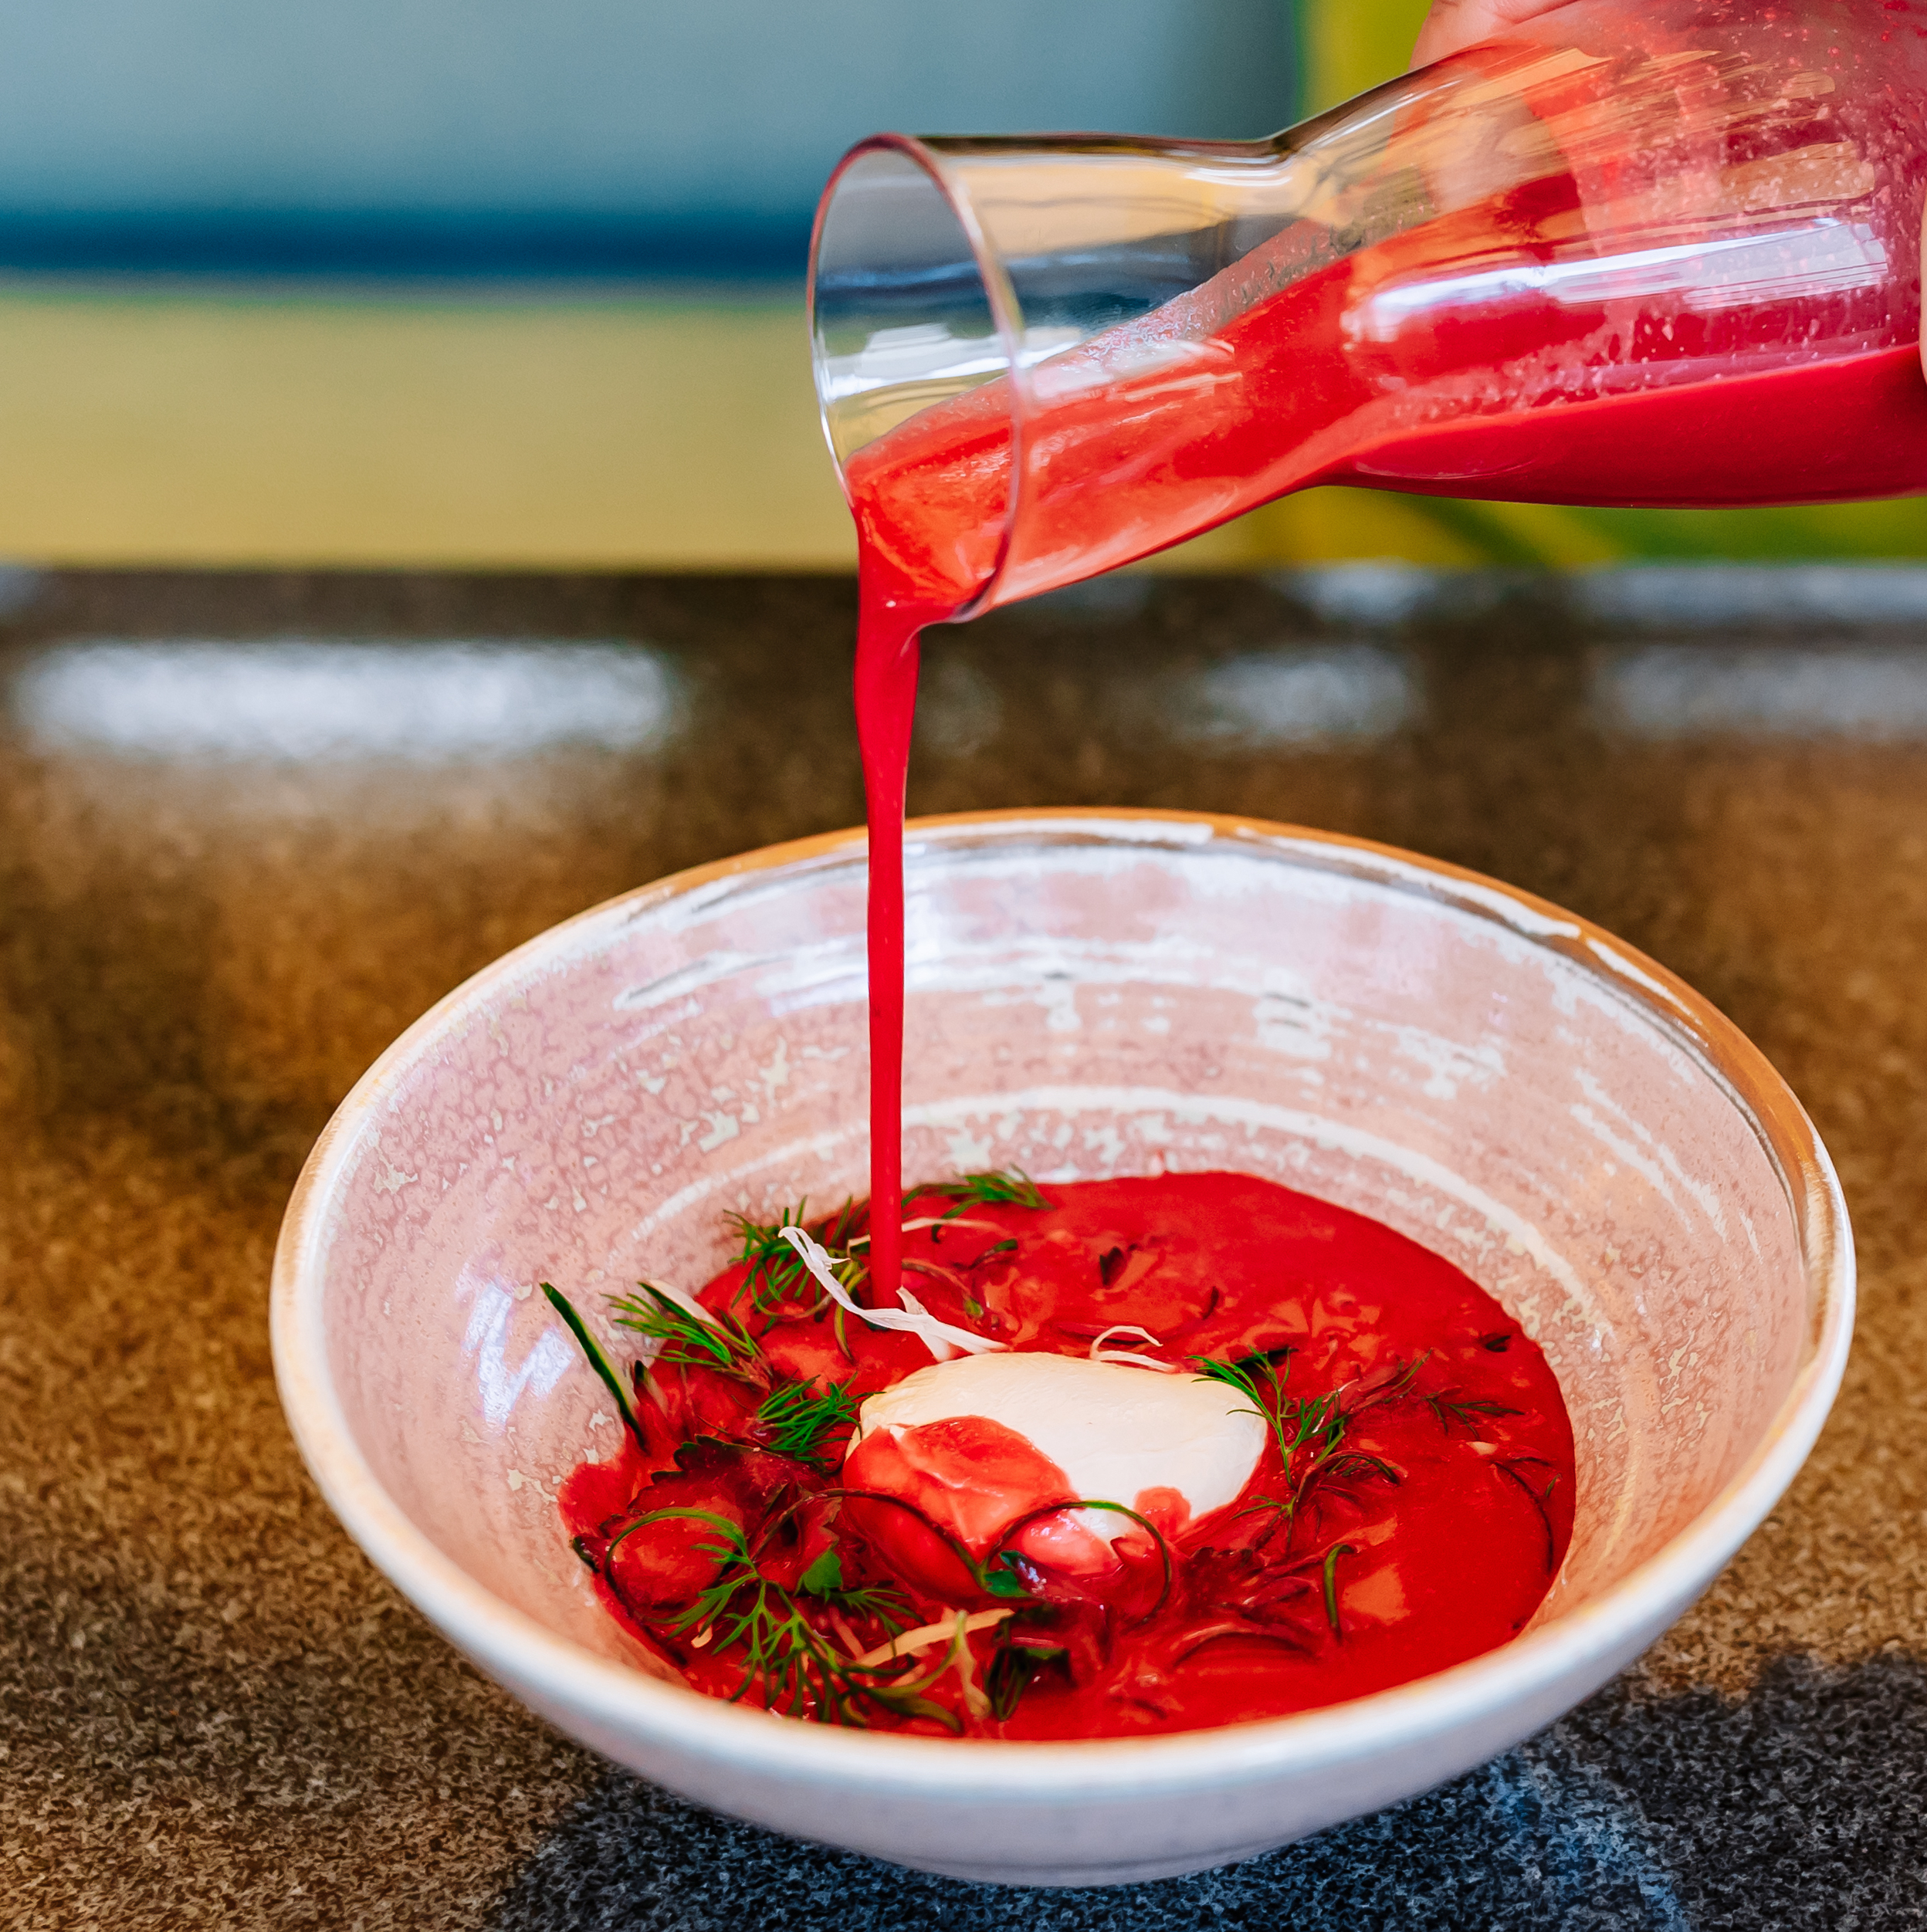 Cold beet soup with lemongrass, fresh vegetables, poached egg and sour cream <span color-type="color" style="color: #ff0000;">new</span><br>410 g.